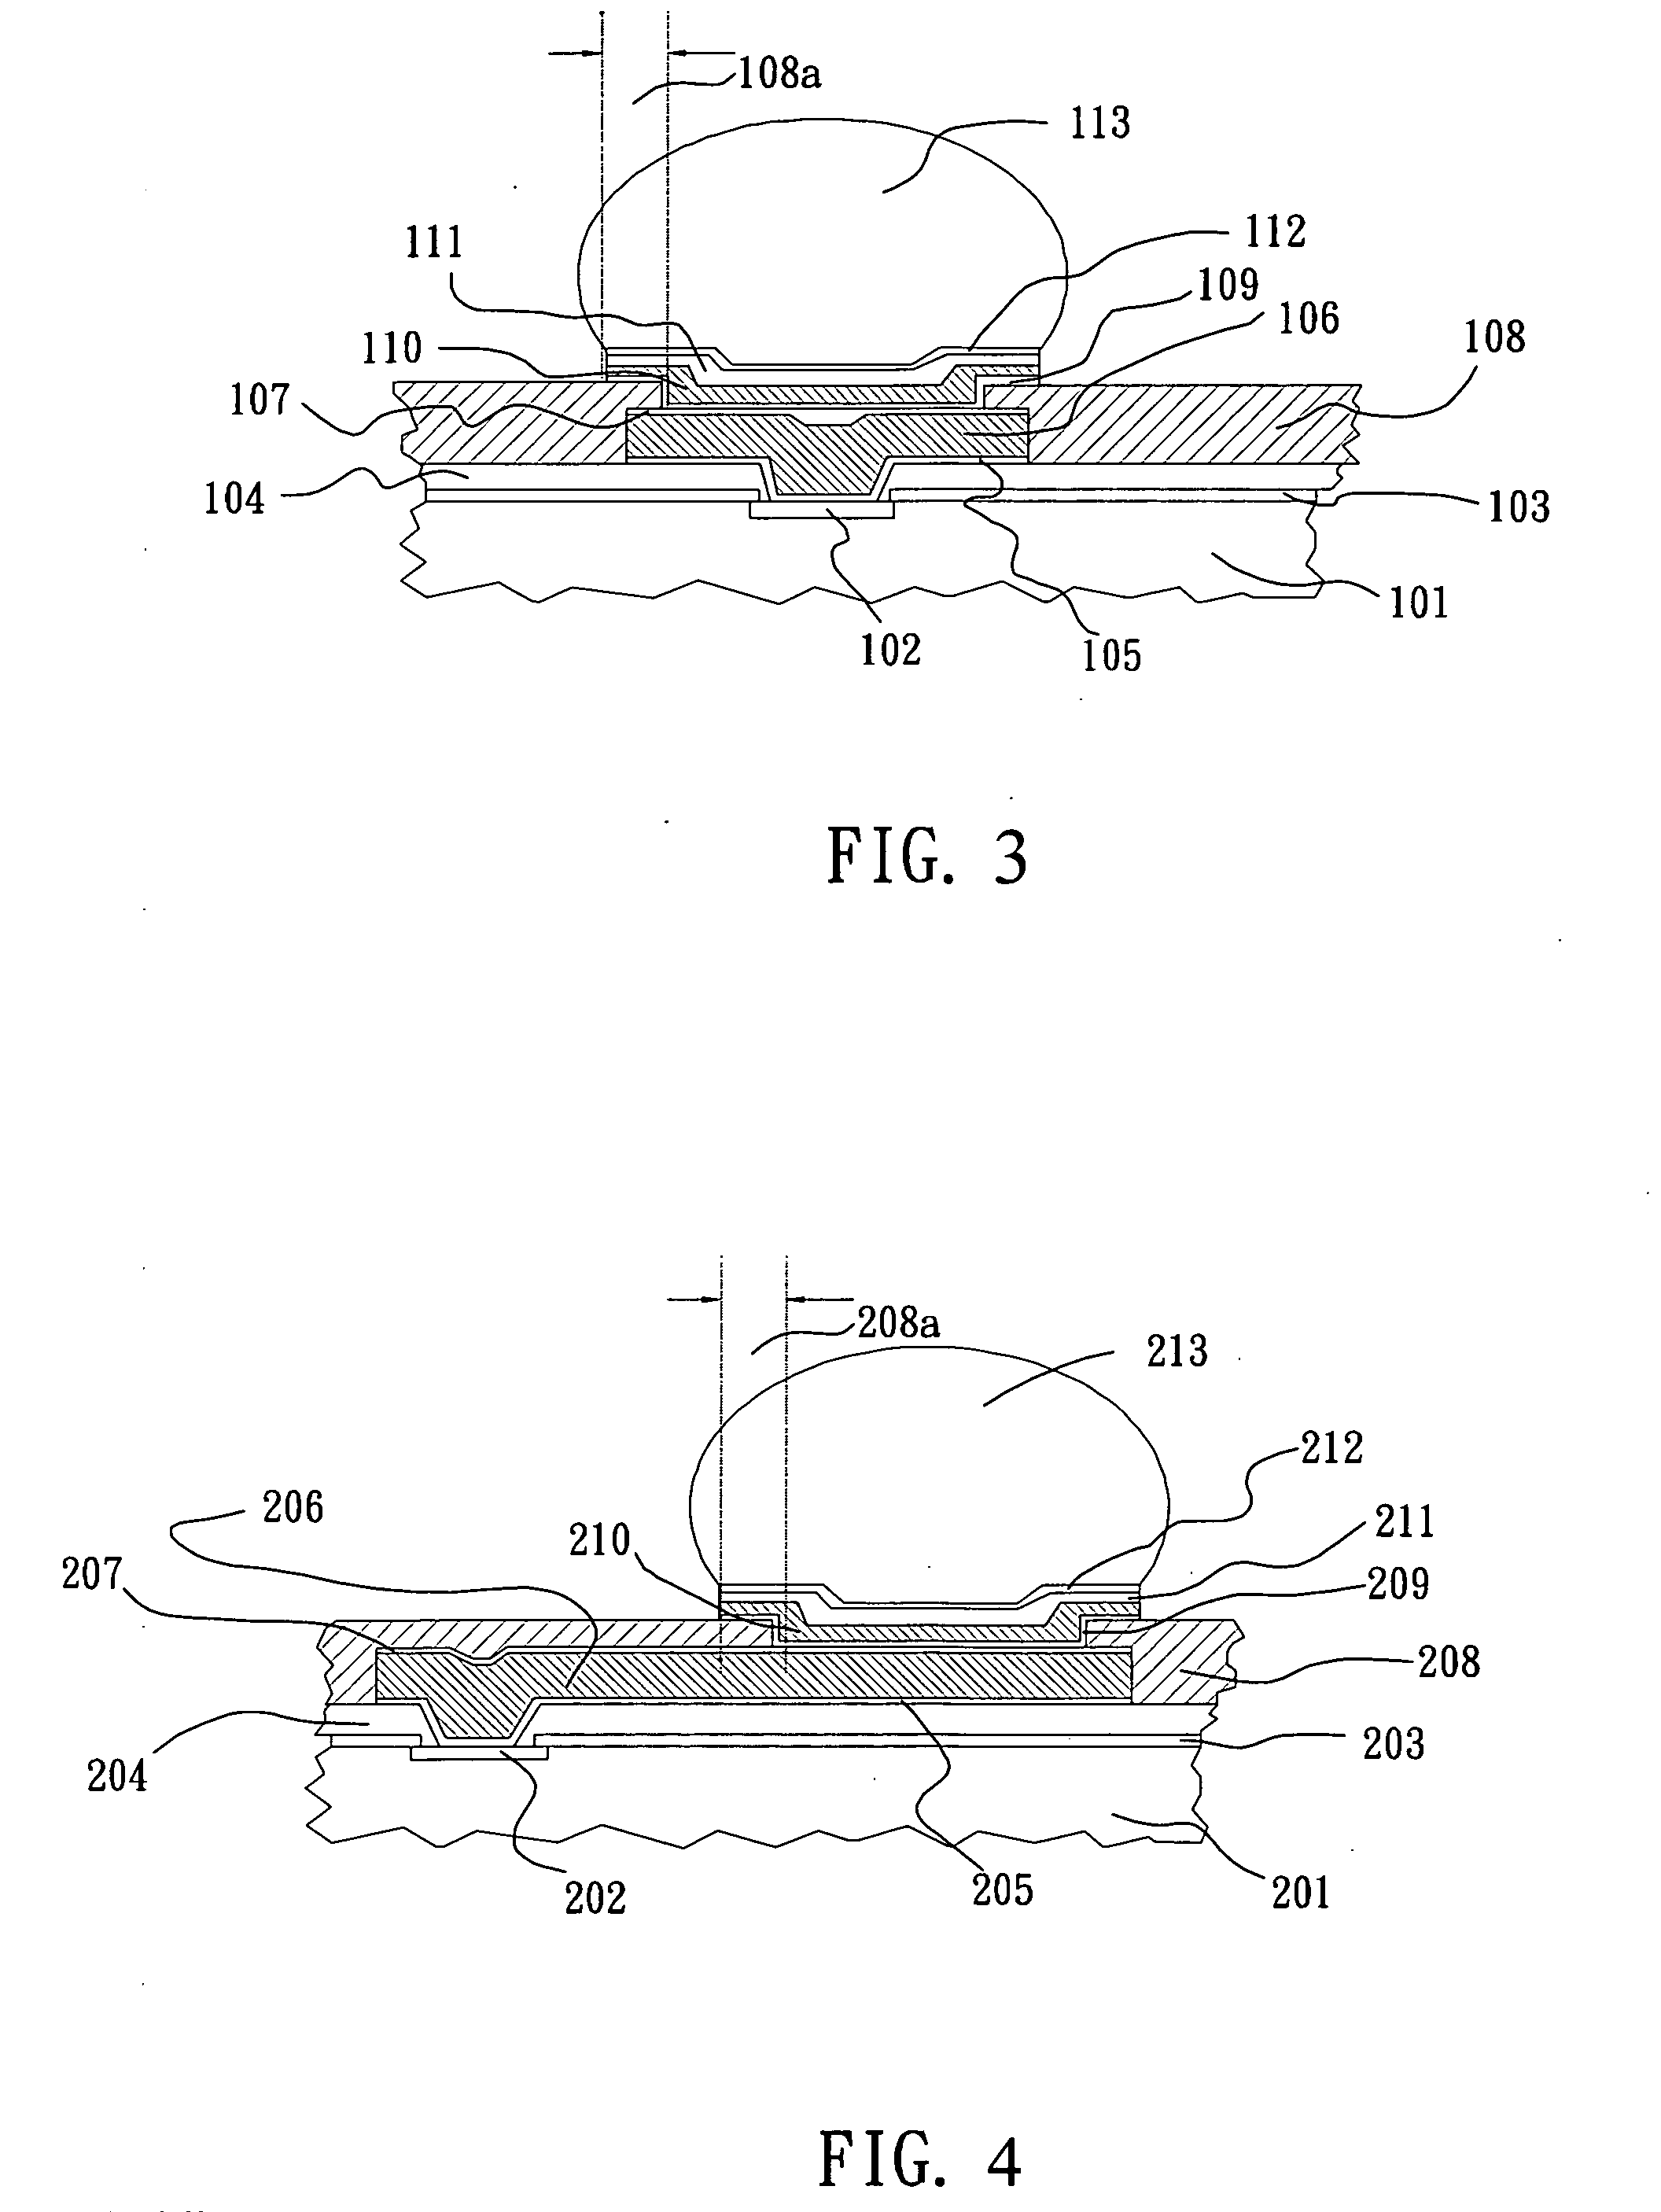 Under bump metallurgy structure of a package and method of making same